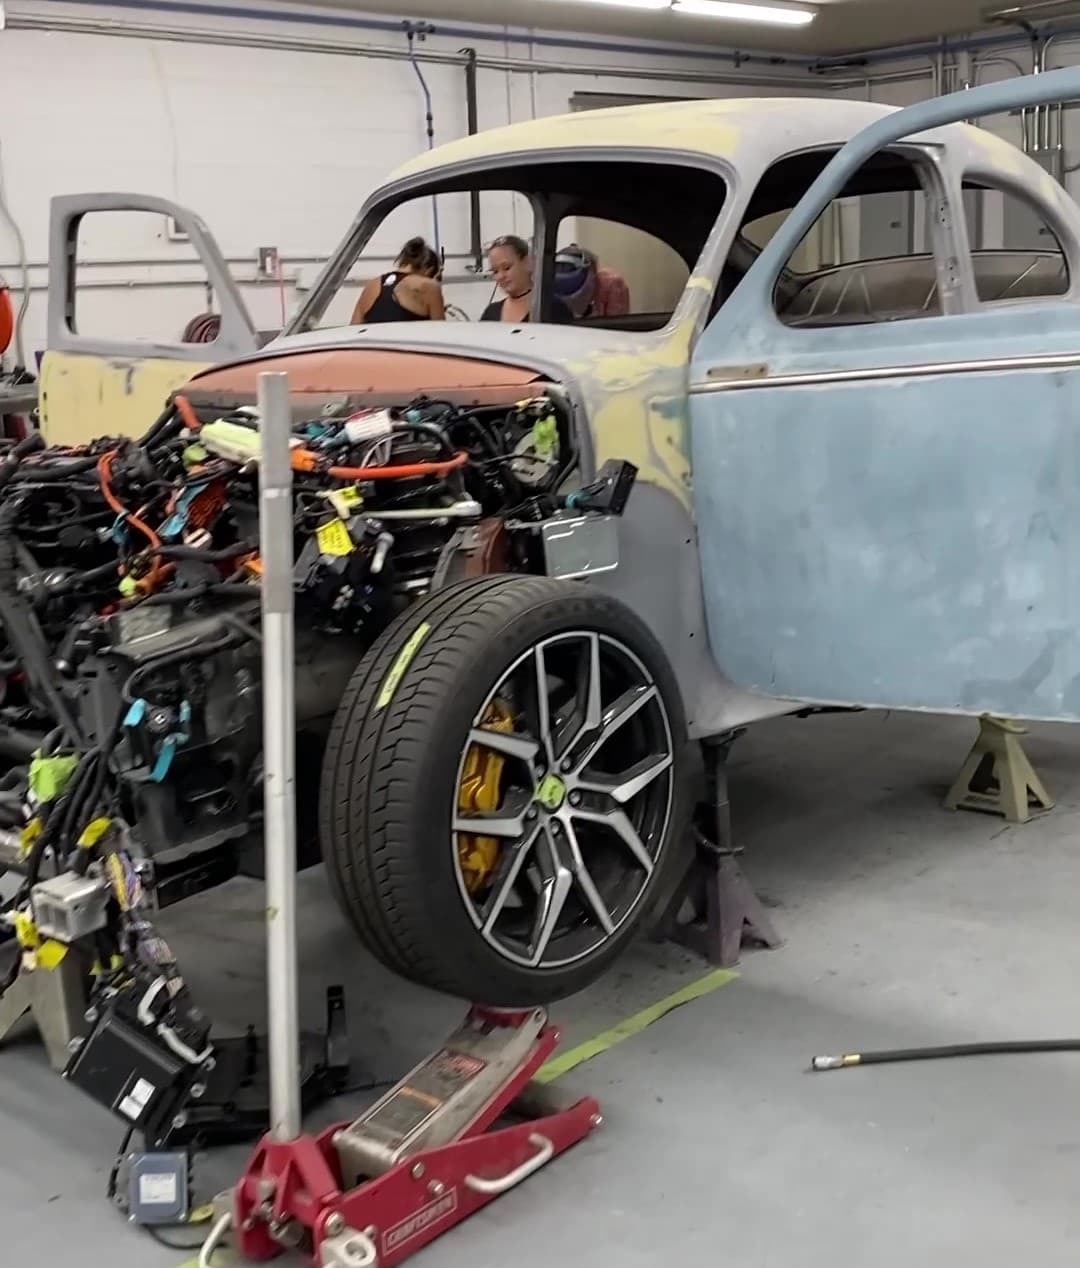 The two cars have become one! The body of the 1961 Volvo PV544 is now welded to the chassis-frame of a new 2019 Volvo S60 T8 Polestar Engineered sedan. (Image courtesy PADT Inc.)